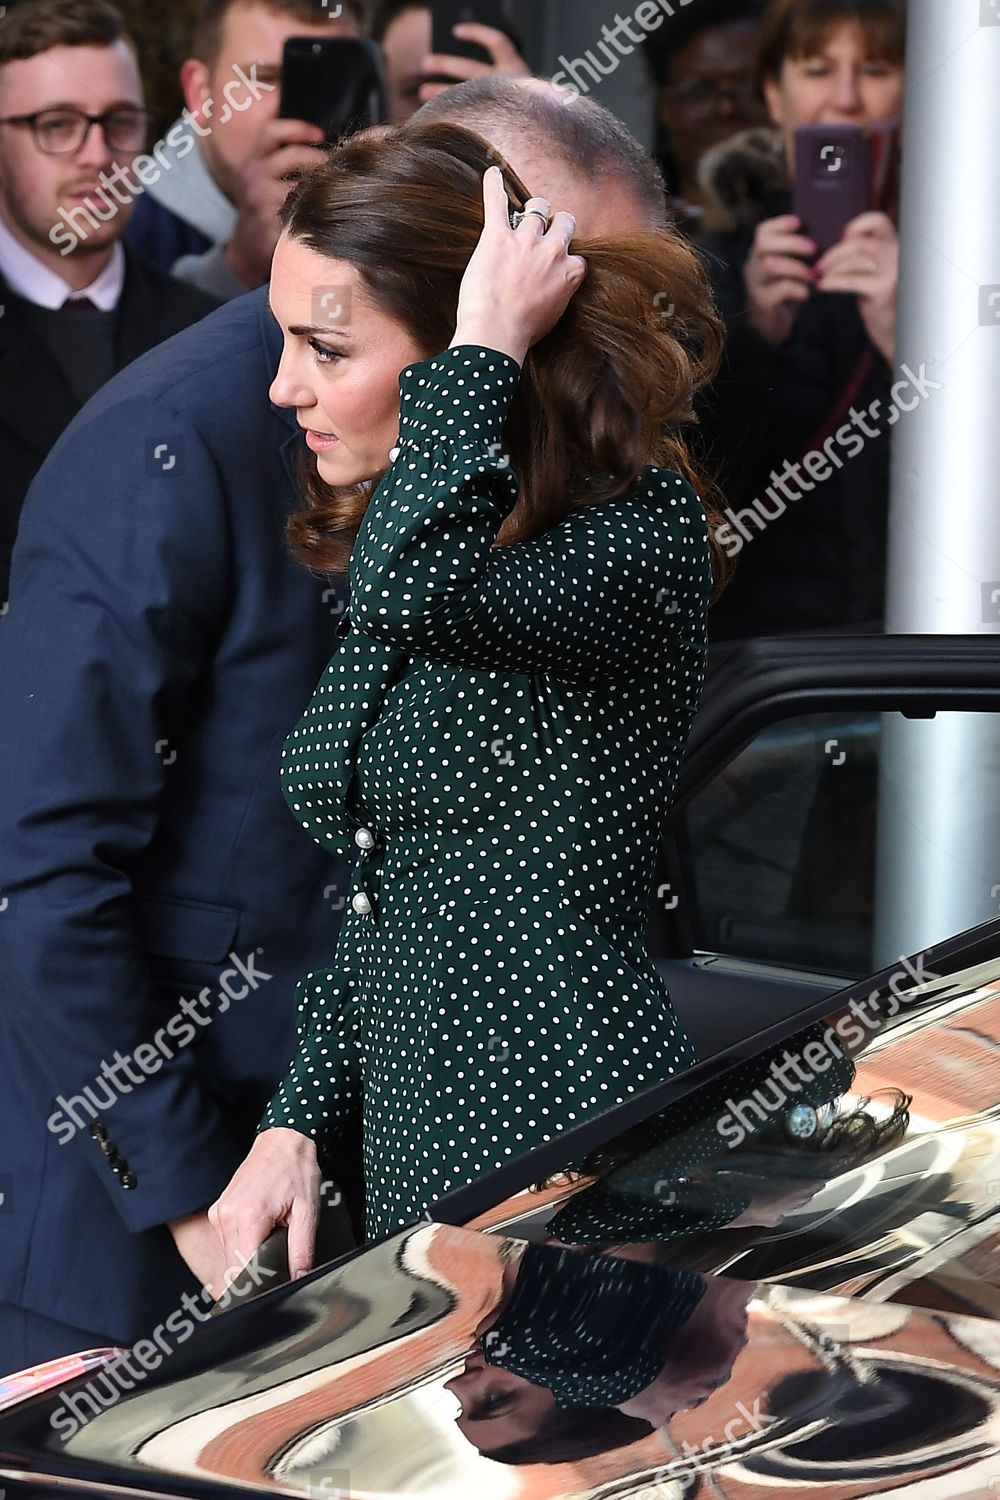 prince-william-and-catherine-duchess-of-cambridge-visit-to-evelina-childrens-hospital-london-uk-shutterstock-editorial-10025189l.jpg